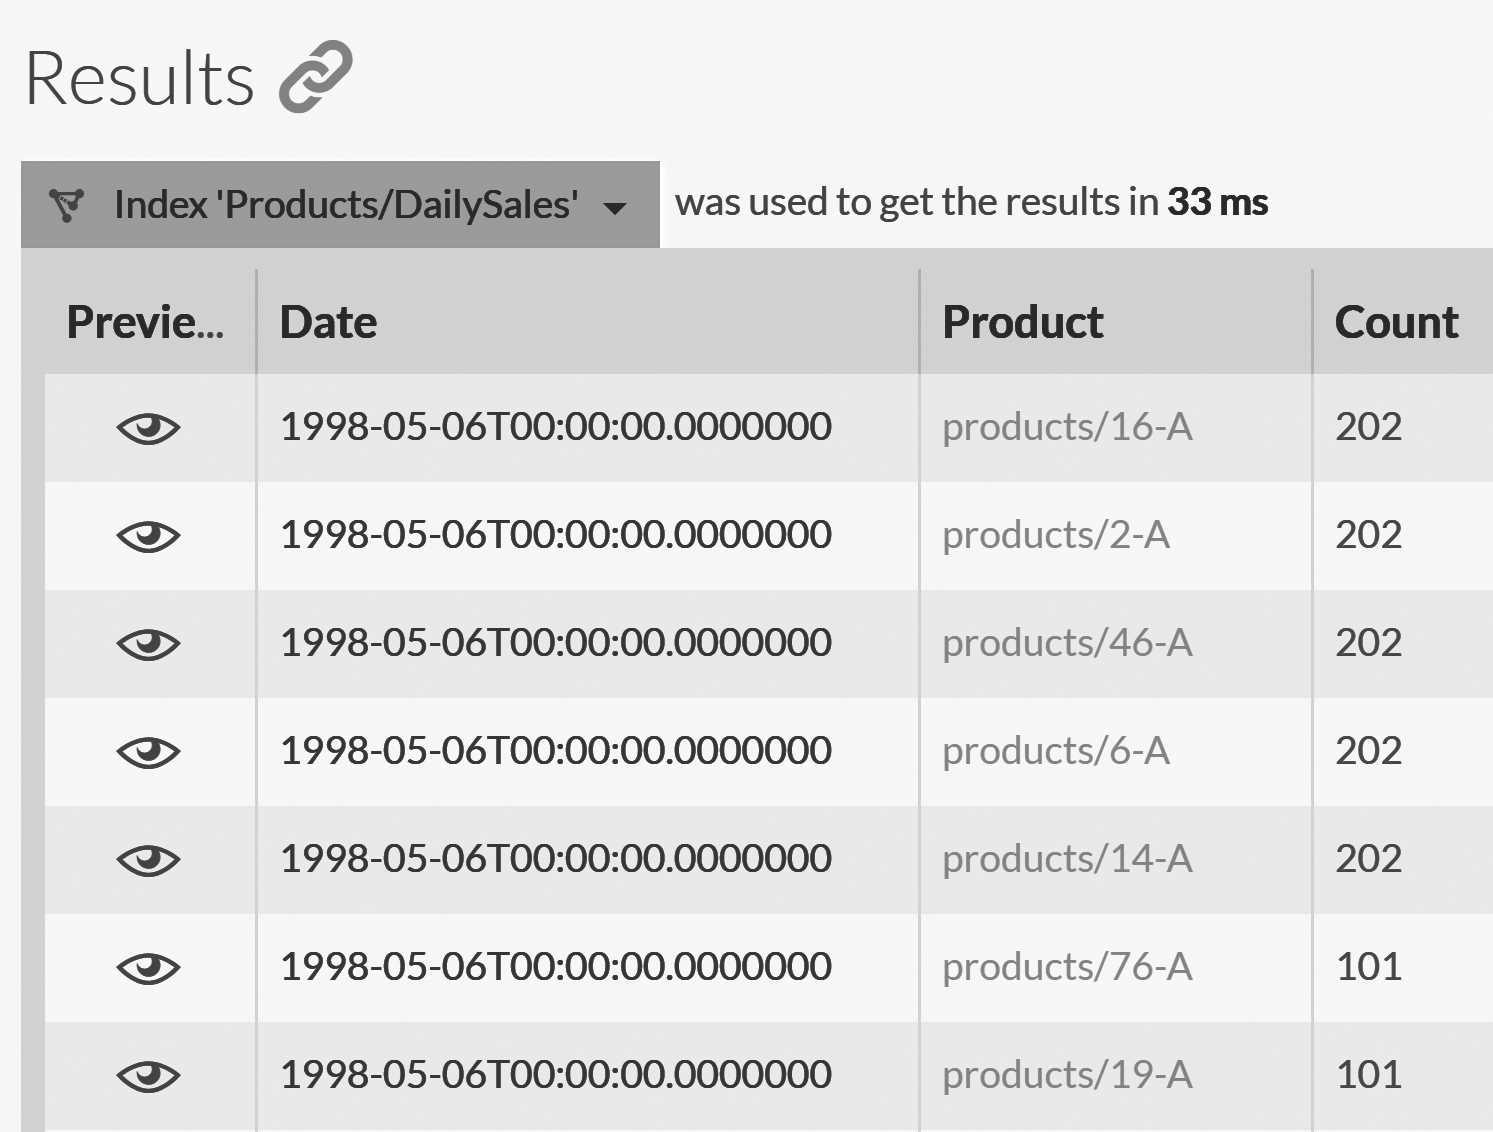 Showing the daily sales for each product on May 6th, 1998